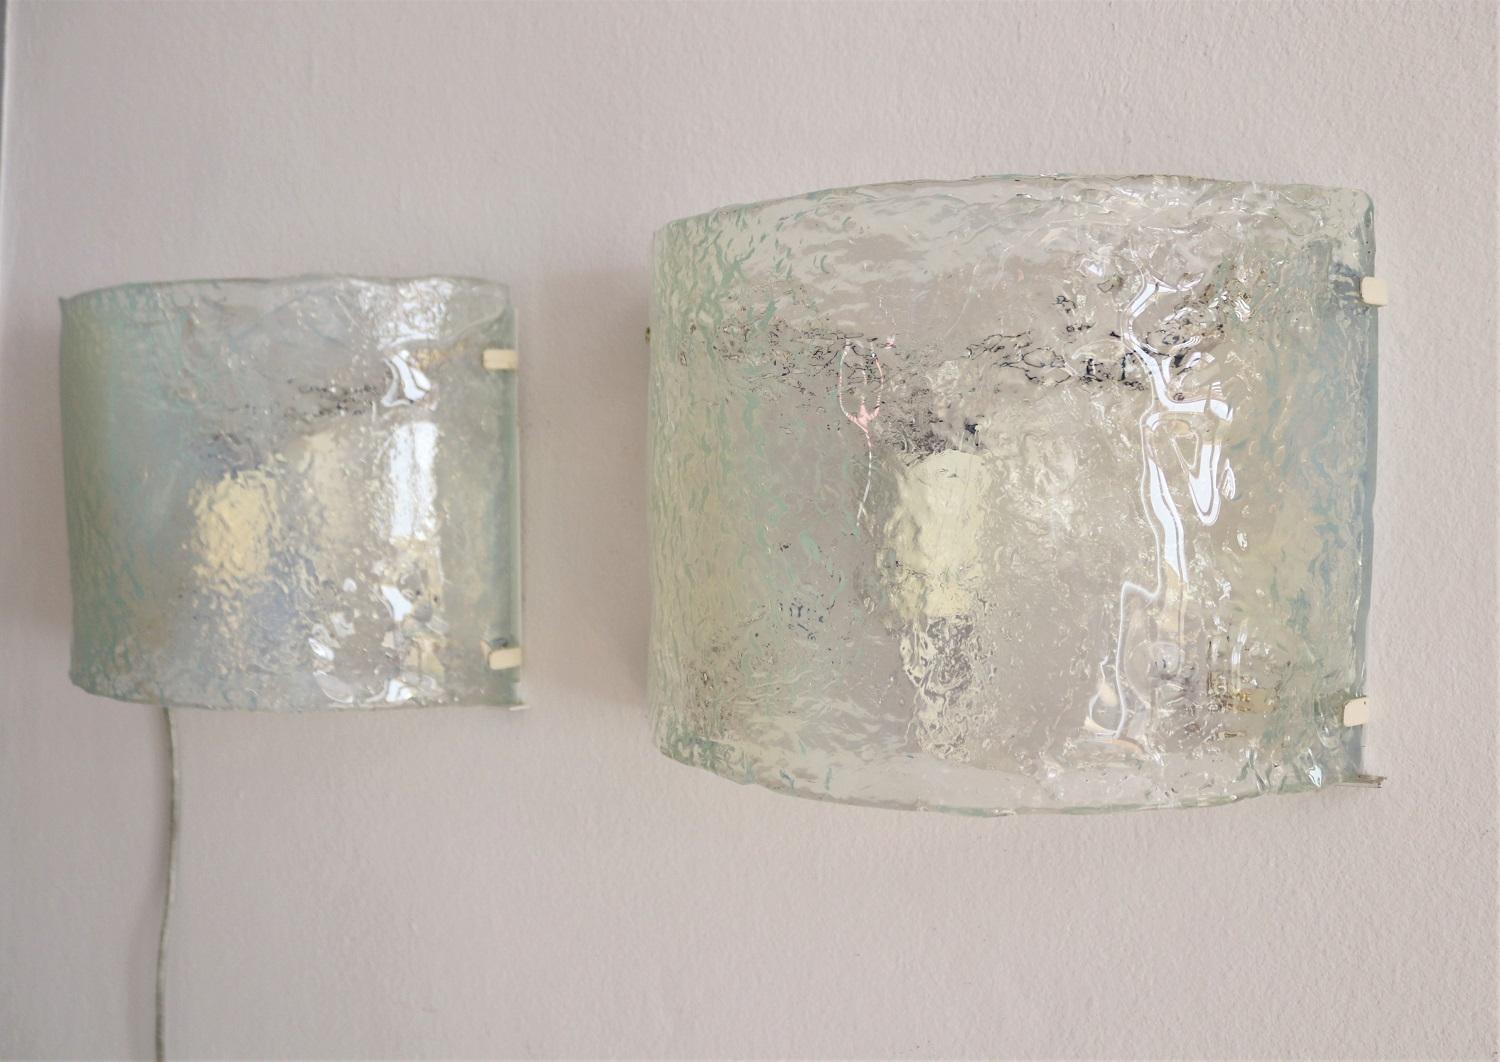 Italian Midcentury Wall Sconces in Opaline Murano Glass by Carlo Nason, 1970s For Sale 4